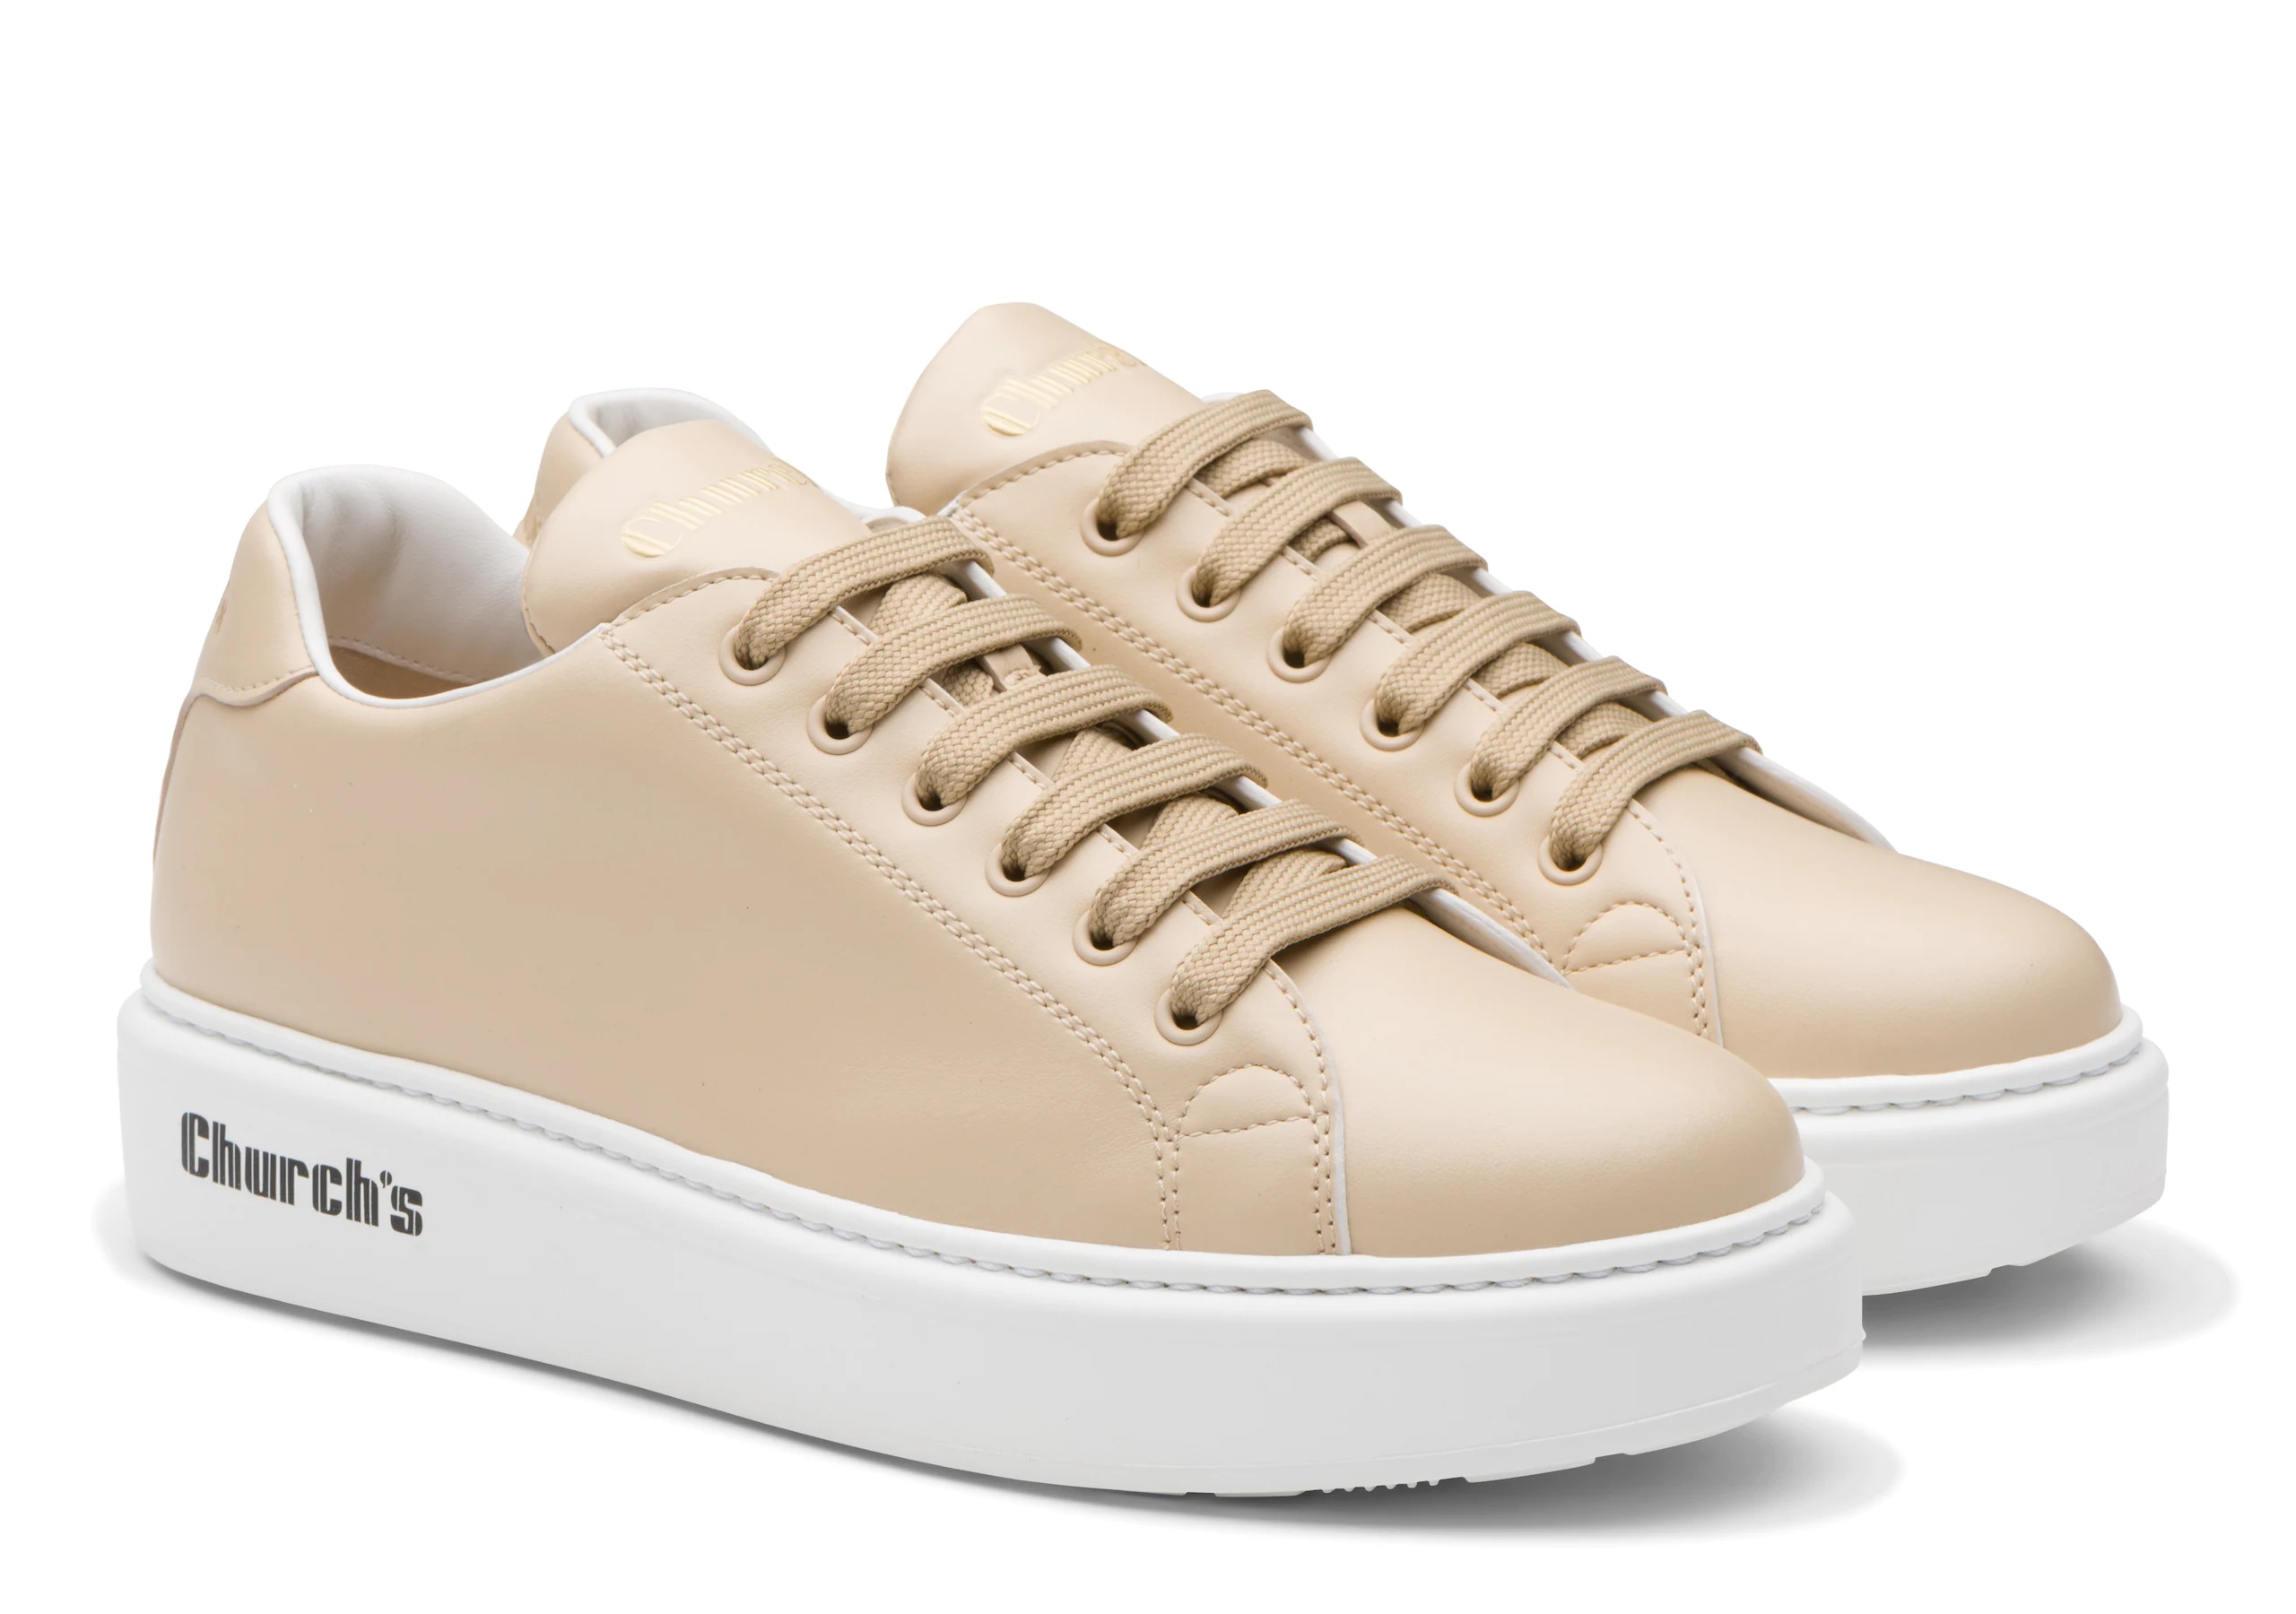 Mach 1
Calf Leather Classic Sneaker Soft pink/white - 2